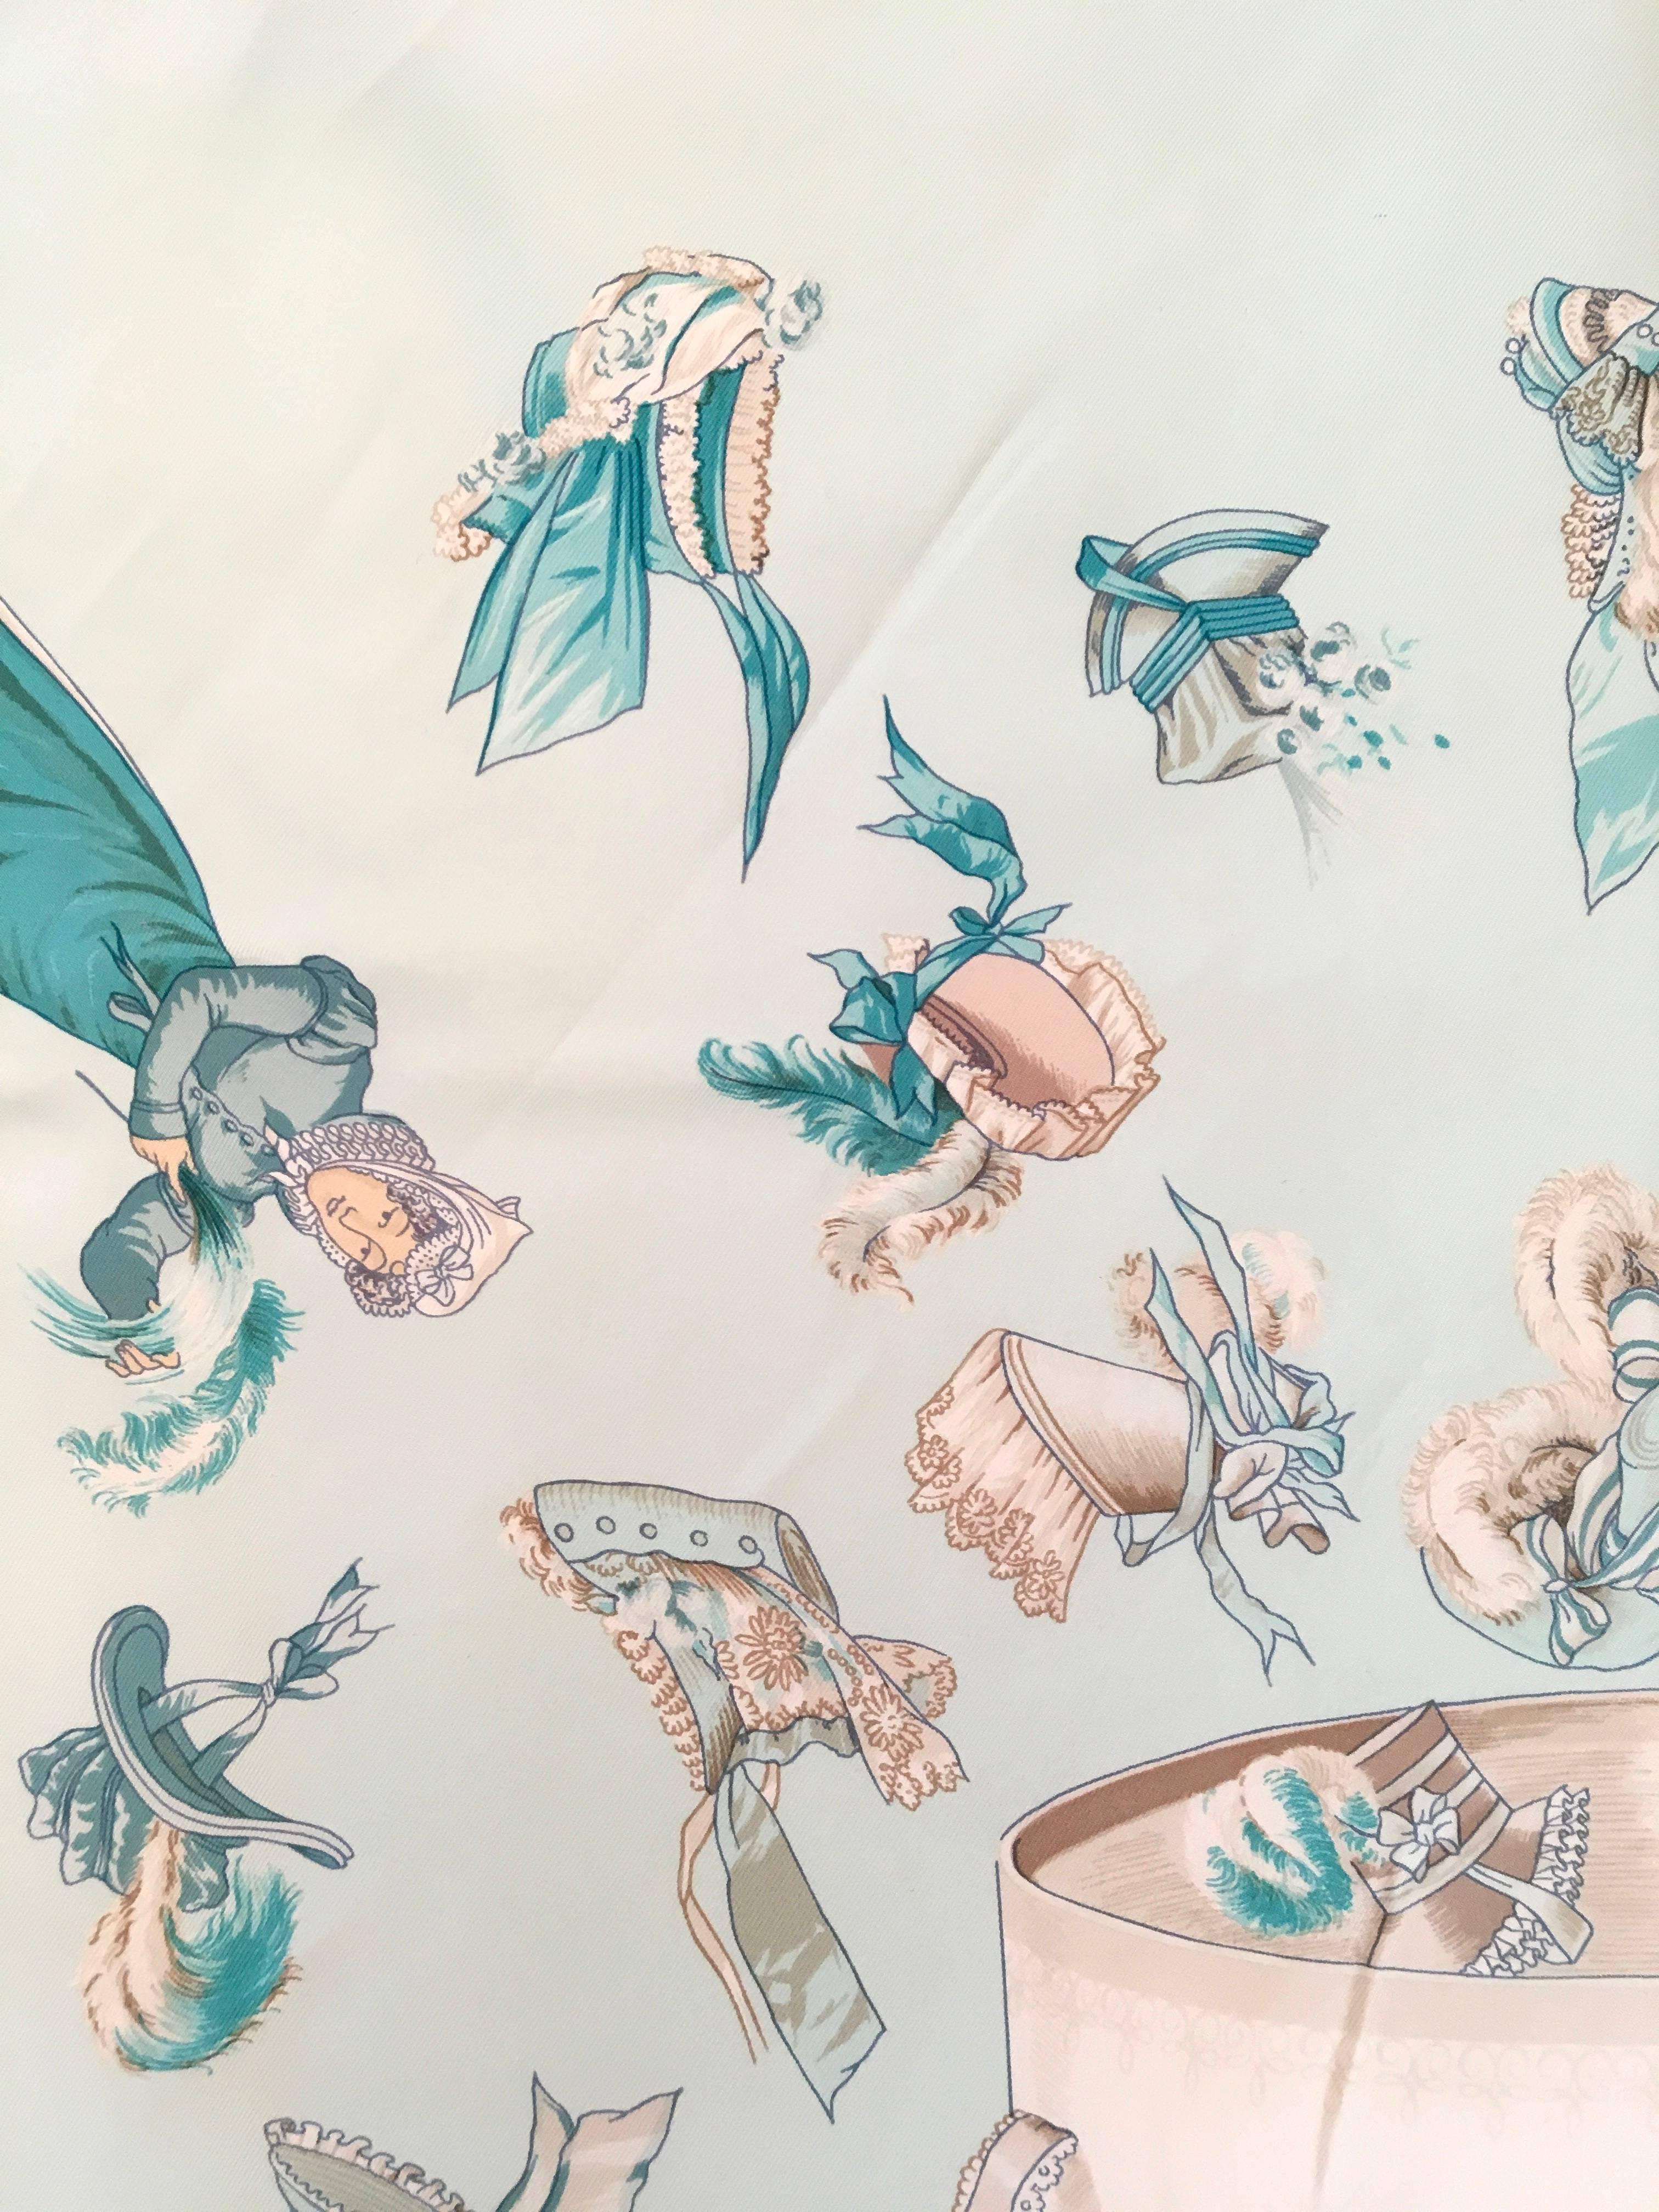 Presented here is a rare silk scarf from Hermes Paris. The scarf is a limited release from 2006 as a re-release of designs from 1956 by artist, Hugo Grygkar. This scarf is a beautiful flashback tribute to the original artwork from 60 years ago. The